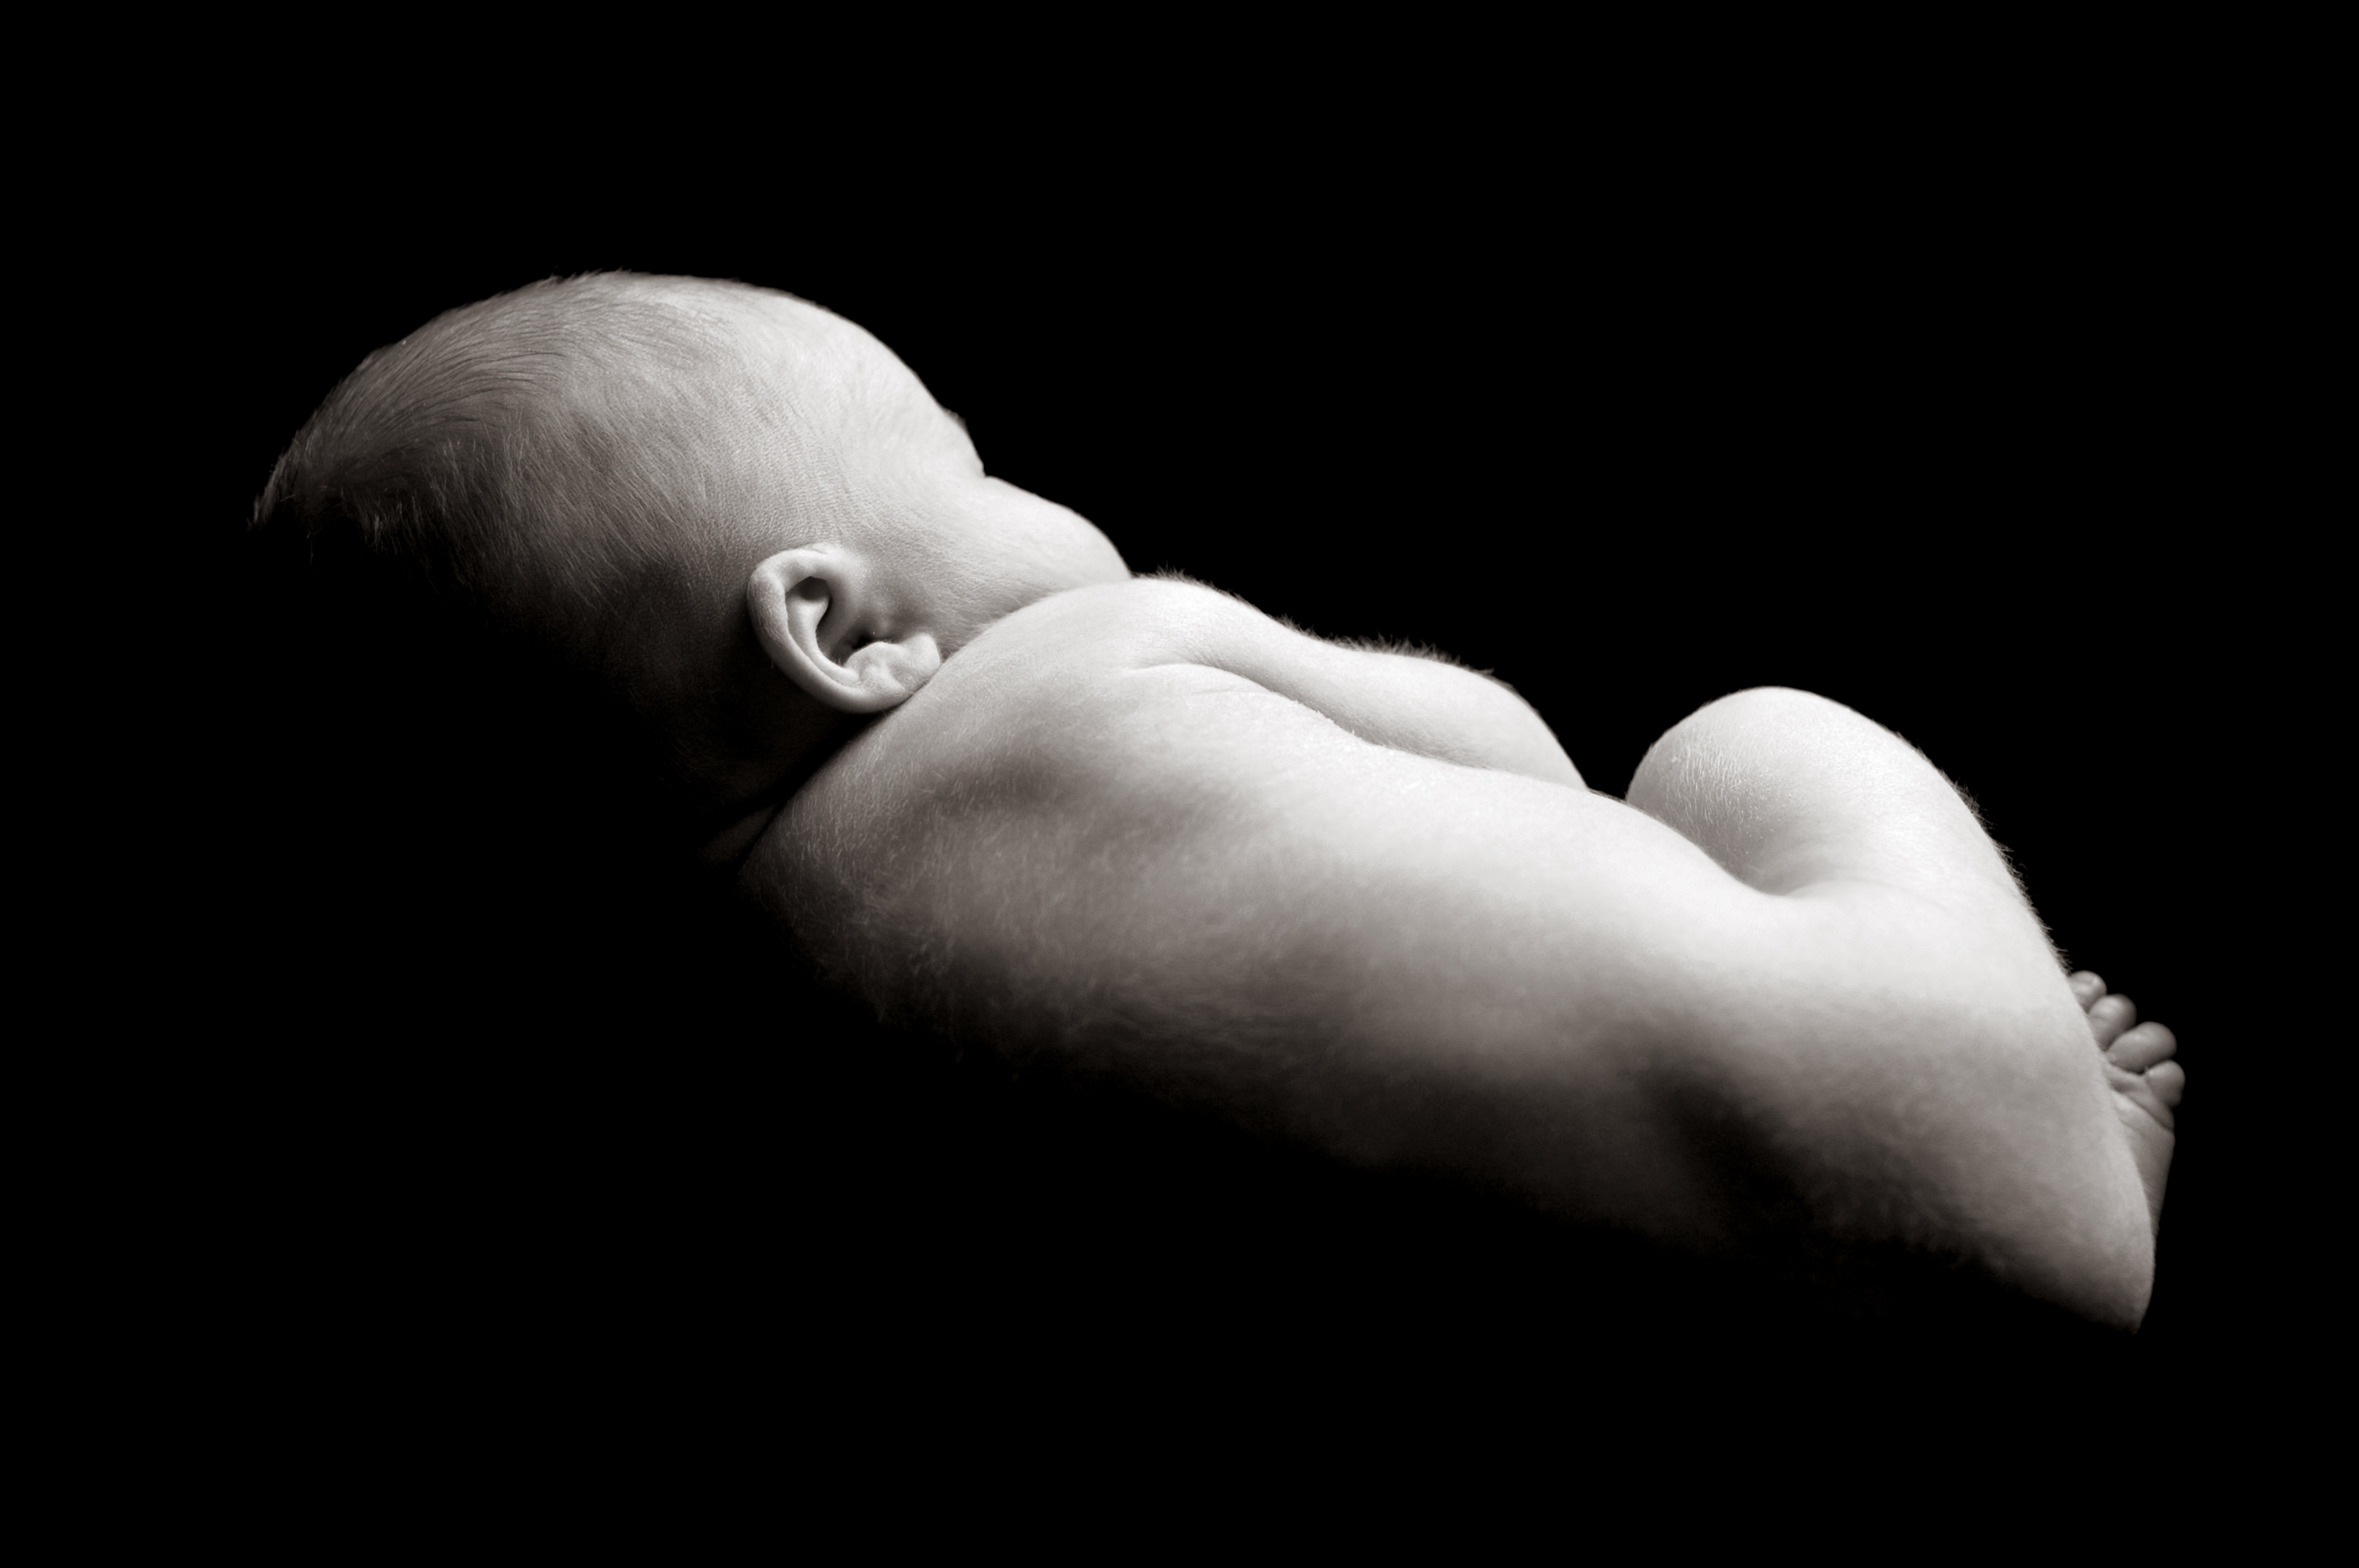 Baby photograph, facing away, black and white